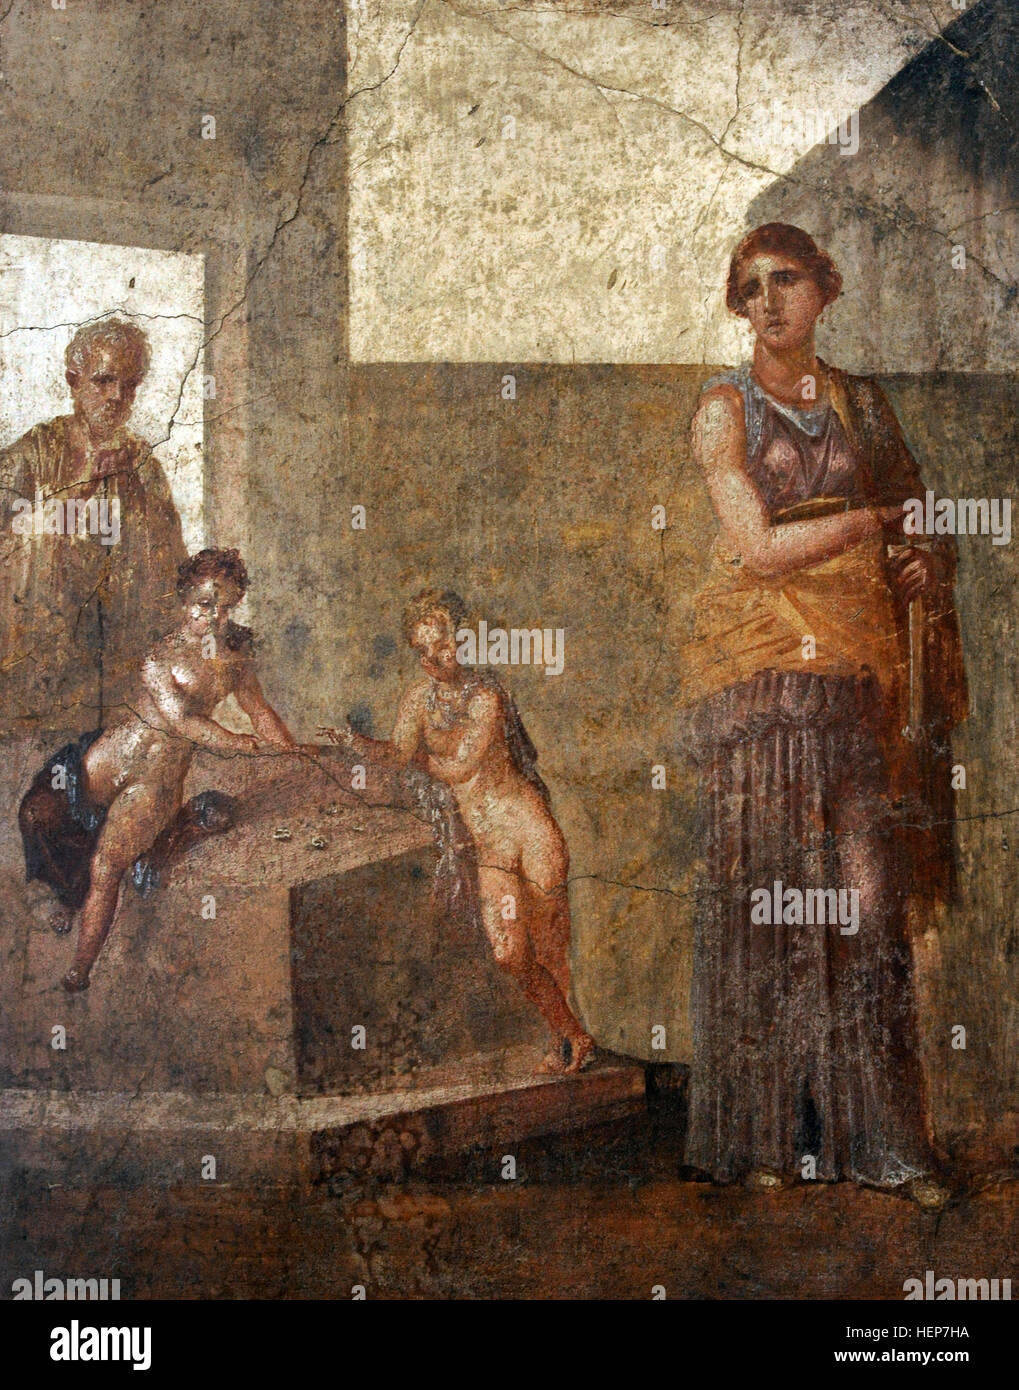 Medea and  her children. She contemplates killing her children as the best way to hurt husband Jason. House of the Dioscuri, Pompeii, Italy. 1st century AD. National Archaeological Museum, Naples. Italy. Stock Photo